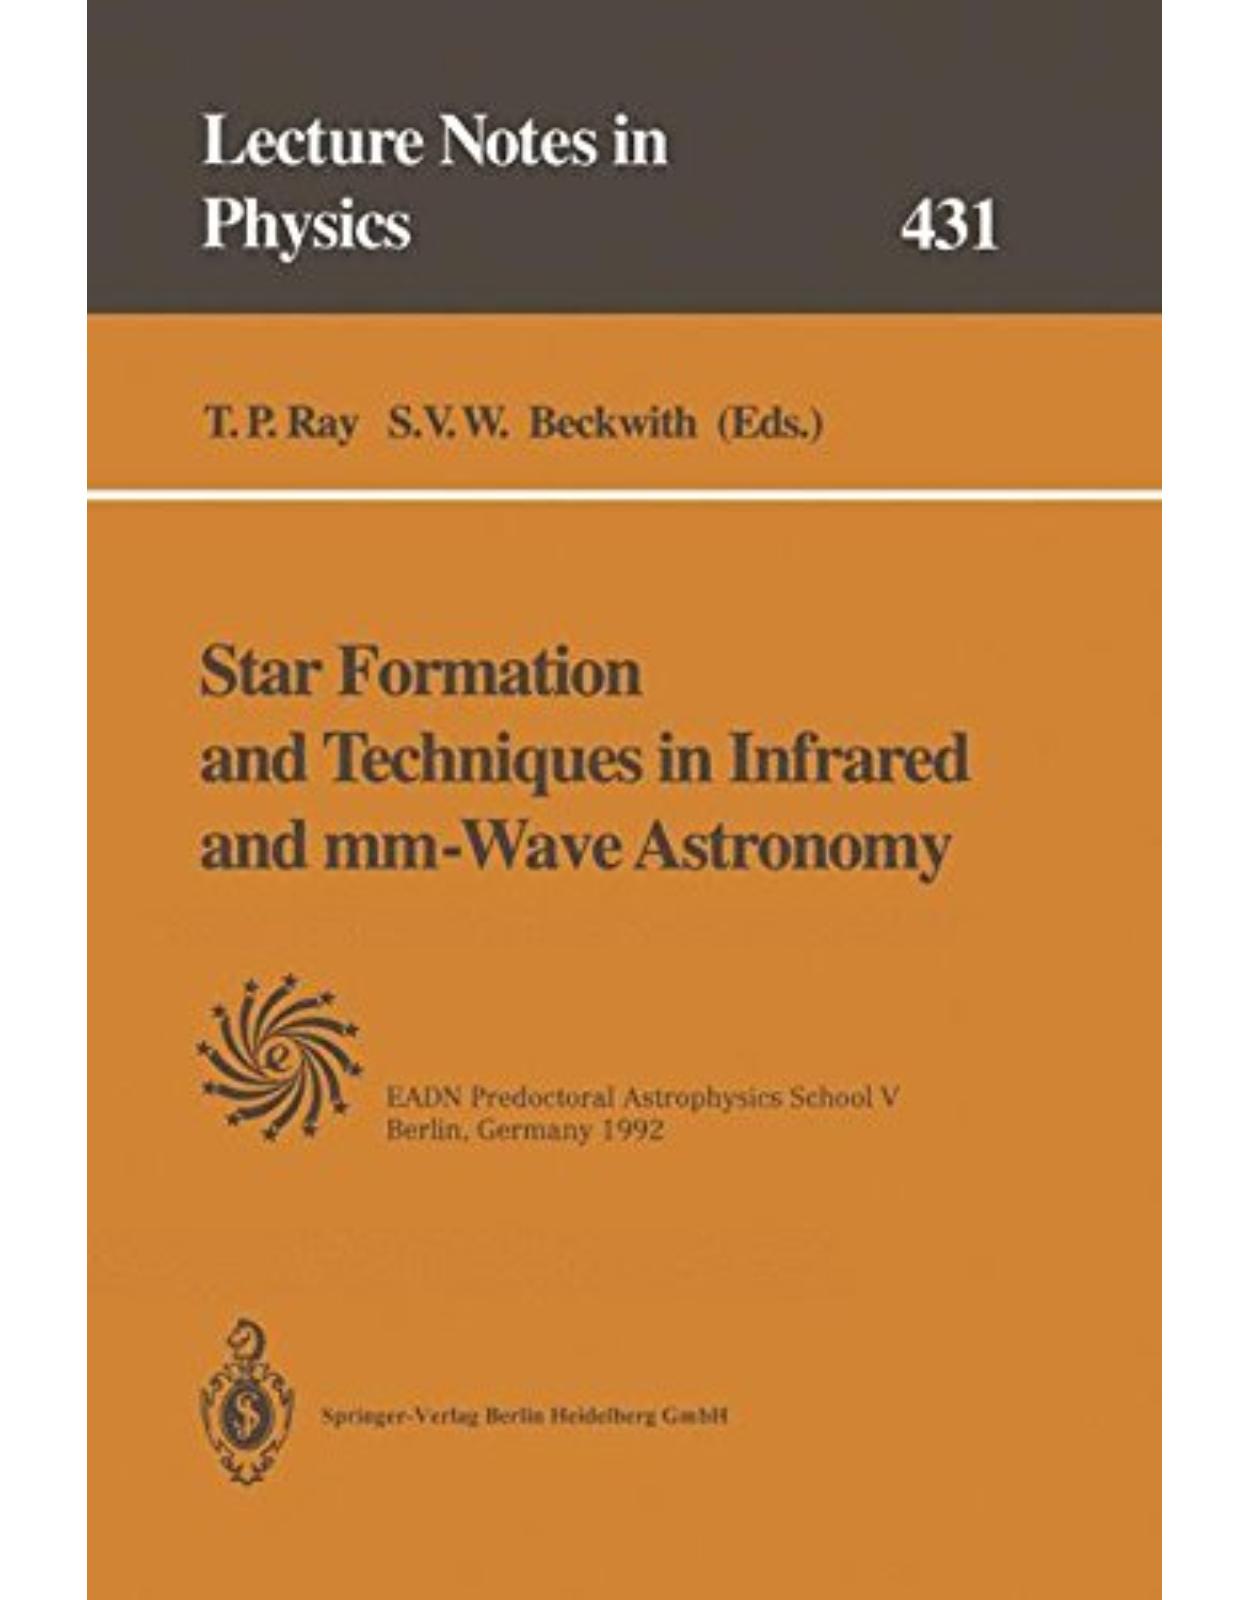 Star Formation and Techniques in Infrared and mmWave Astronomy